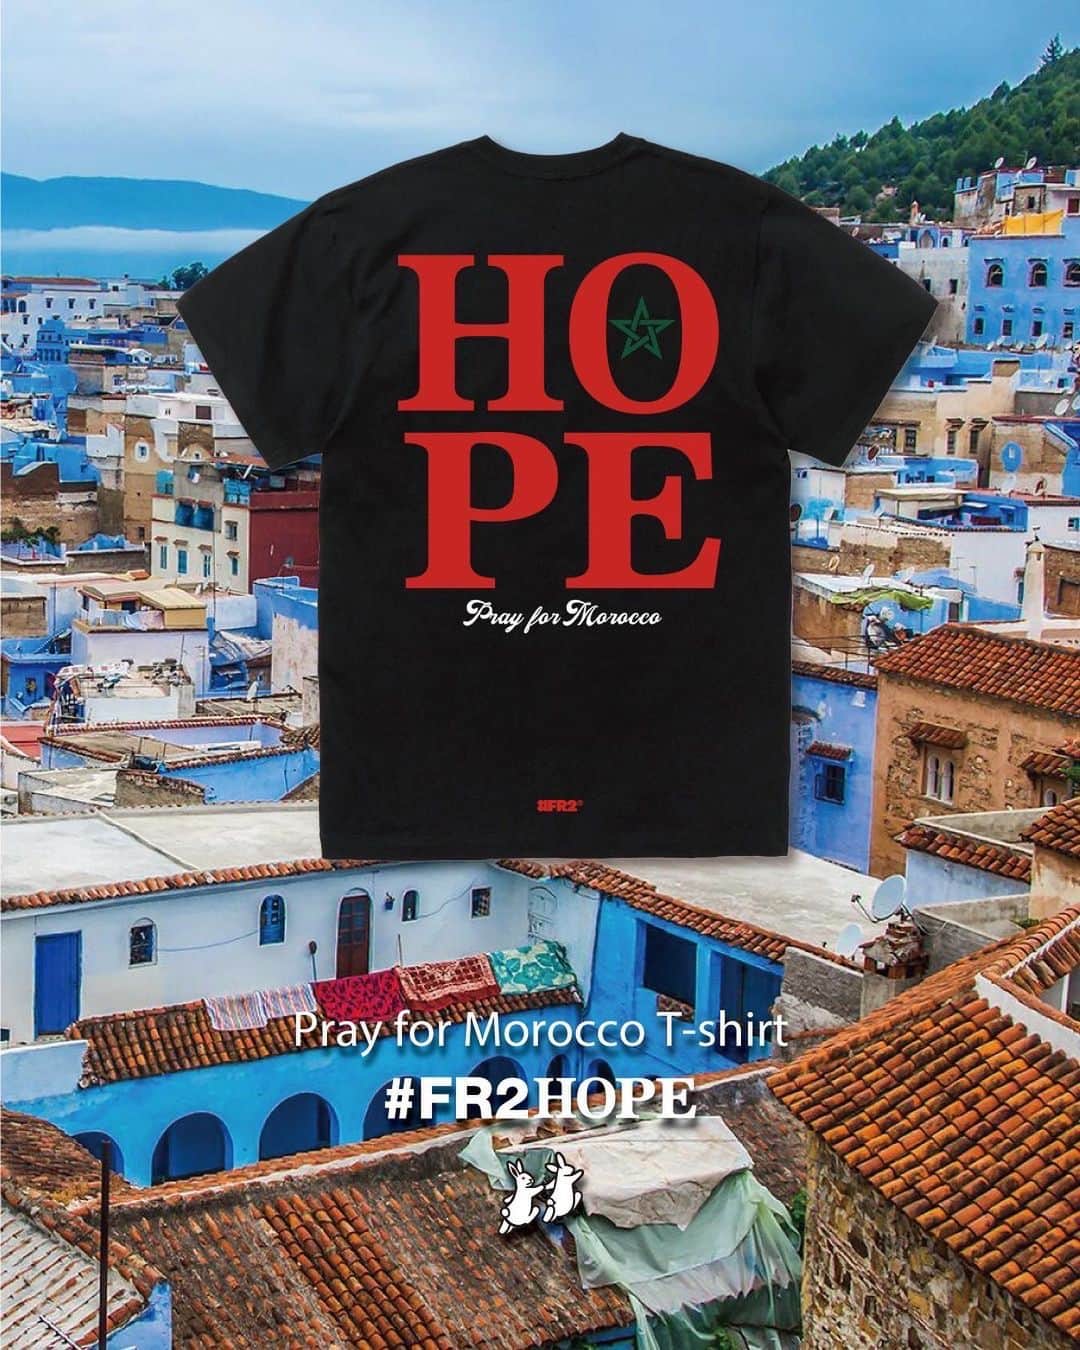 #FR2さんのインスタグラム写真 - (#FR2Instagram)「#FR2Hope As a project, we will provide support for the disaster that occurred in Morocco on September 9th. Starting today, we will start accepting orders at the #FR2 Online Store. All proceeds from product sales, minus the costs involved in producing this project, will be donated to the Japanese Red Cross Society.  Order period: September 12th (Tuesday) to September 18th (Monday), 2023  #FR2希望 プロジェクトとして、9月9日にモロッコで発生した災害への支援を行います。 本日から #FR2 Online Storeで受注販売を開始いたします。 こちらの企画の制作にかかわるコストを引いた商品の売上の全ては、日本赤十字社に寄付します。  受注期間：2023年9月12日（火）～18日（月）  #FR2Hope 作为一个项目，我们将为 9 月 9 日摩洛哥发生的灾难提供支持。 从今天开始，我们将开始在 #FR2 在线商店接受订单。 产品销售的所有收益，减去制作该项目所涉及的成本，将捐赠给日本红十字会。  订购时间：2023年9月12日（星期二）至9月18日（星期一）  #FR2Hope 作為一個項目，我們將為 9 月 9 日摩洛哥發生的災難提供支持。 從今天開始，我們將開始在 #FR2 在線商店接受訂單。 產品銷售的所有收益，減去製作該項目所涉及的成本，將捐贈給日本紅十字會。  訂購時間：2023年9月12日（星期二）至9月18日（星期一）  #FR2希望　#FR2HOPE」9月12日 19時41分 - fxxkingrabbits